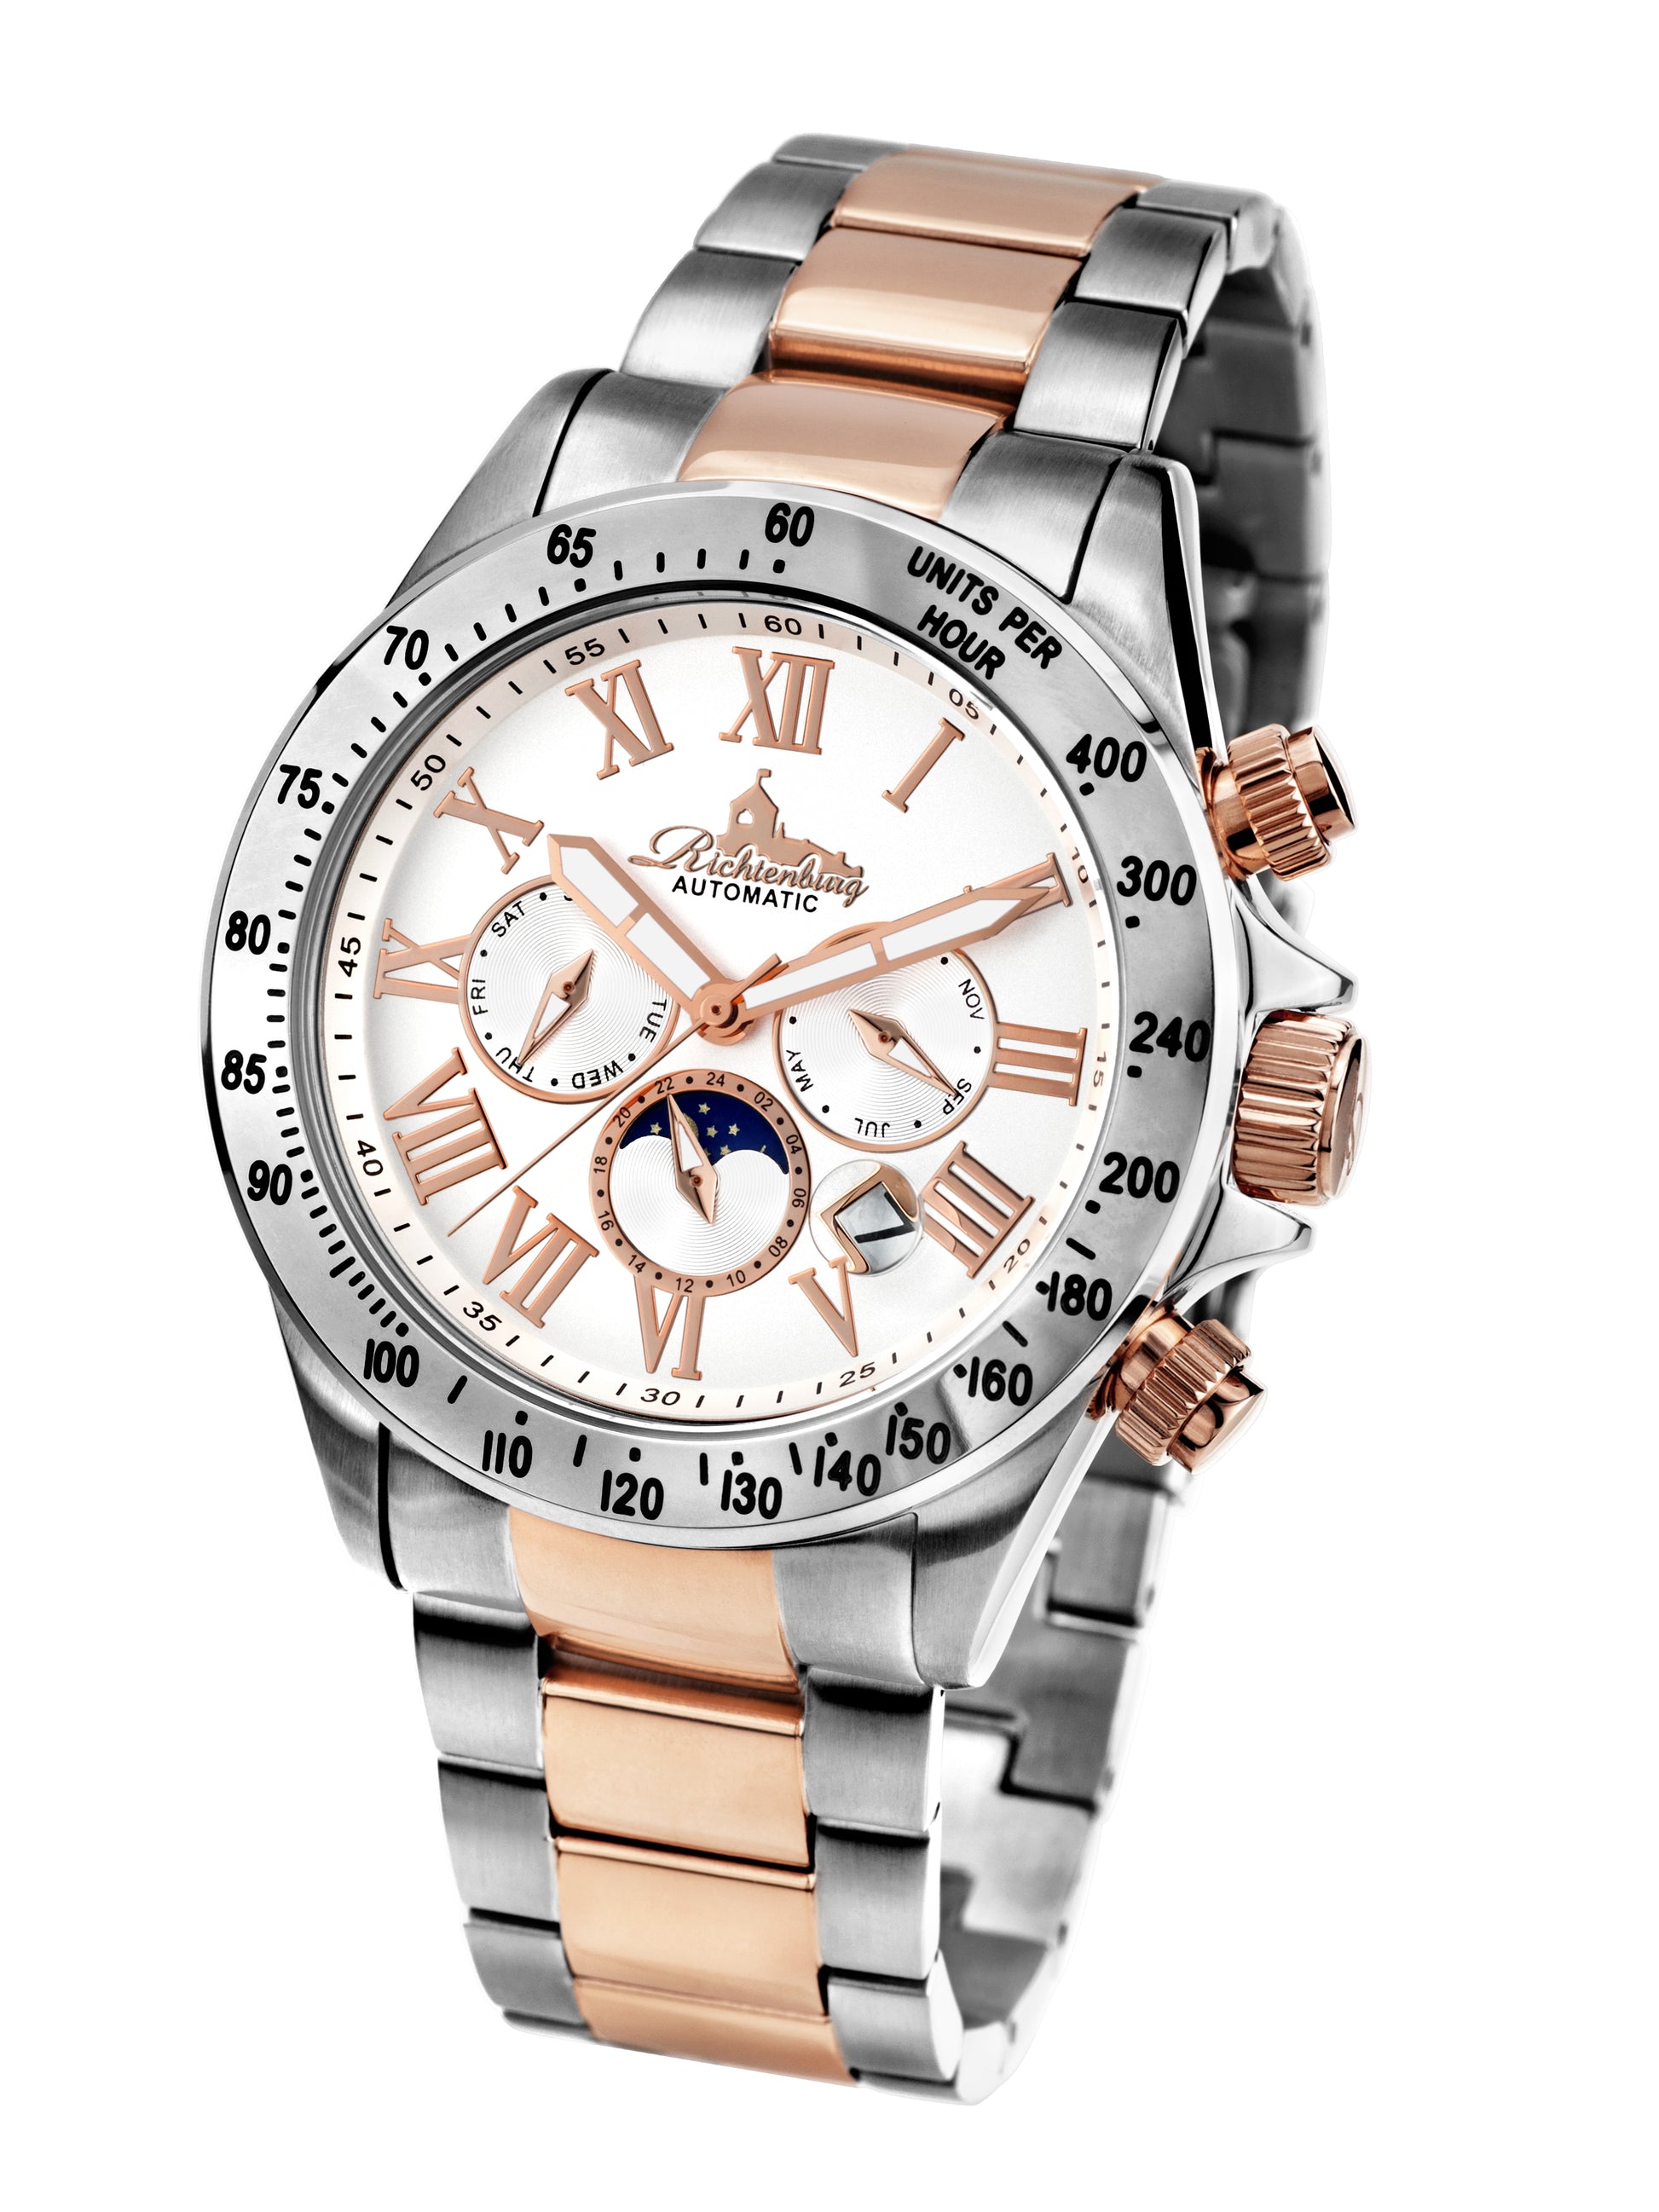 Automatic watches — Fastpace — Richtenburg — steel silver rosegold two-tone